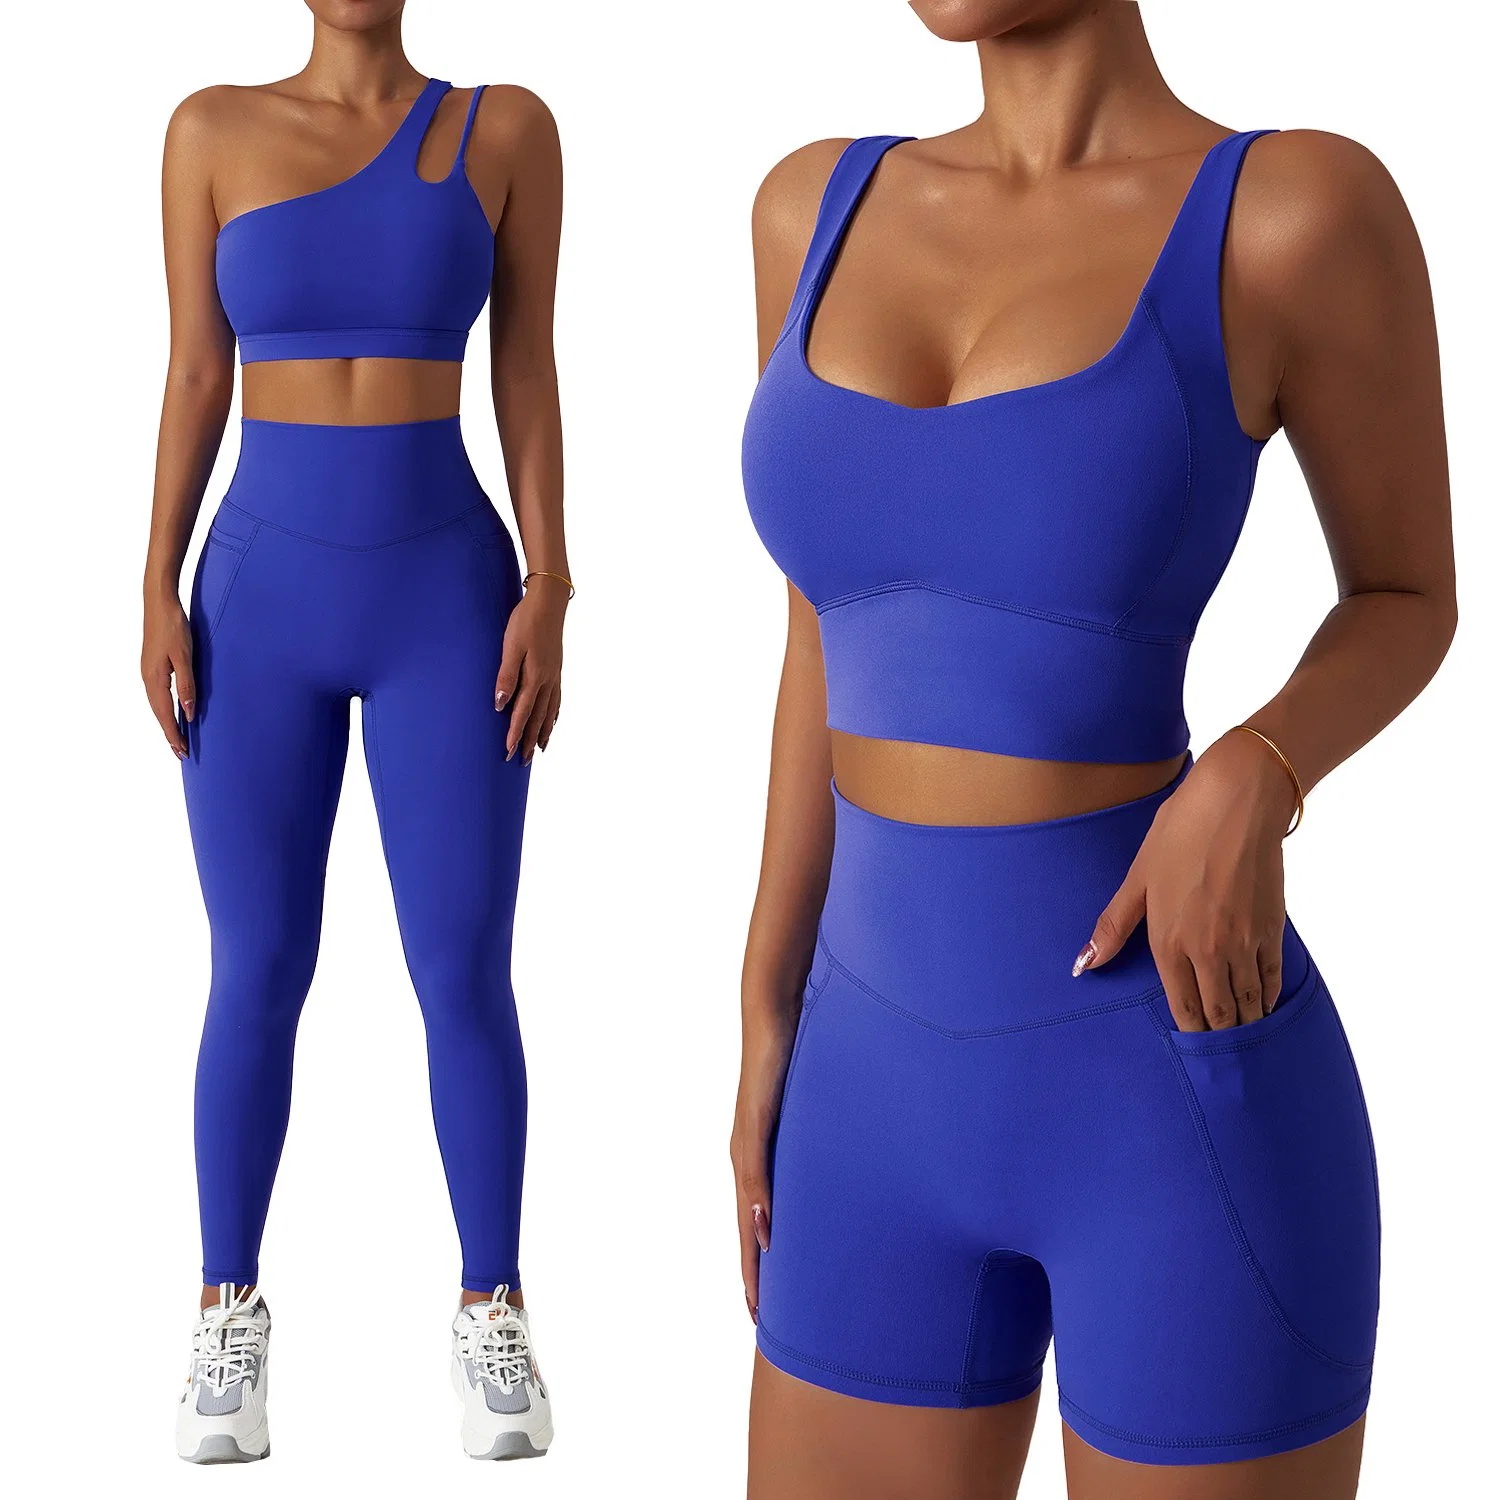 4 Pieces Yoga Set Gym Outfits Fitness Sports Bra and Leggings Suit Workout Clothes Women Sportswear